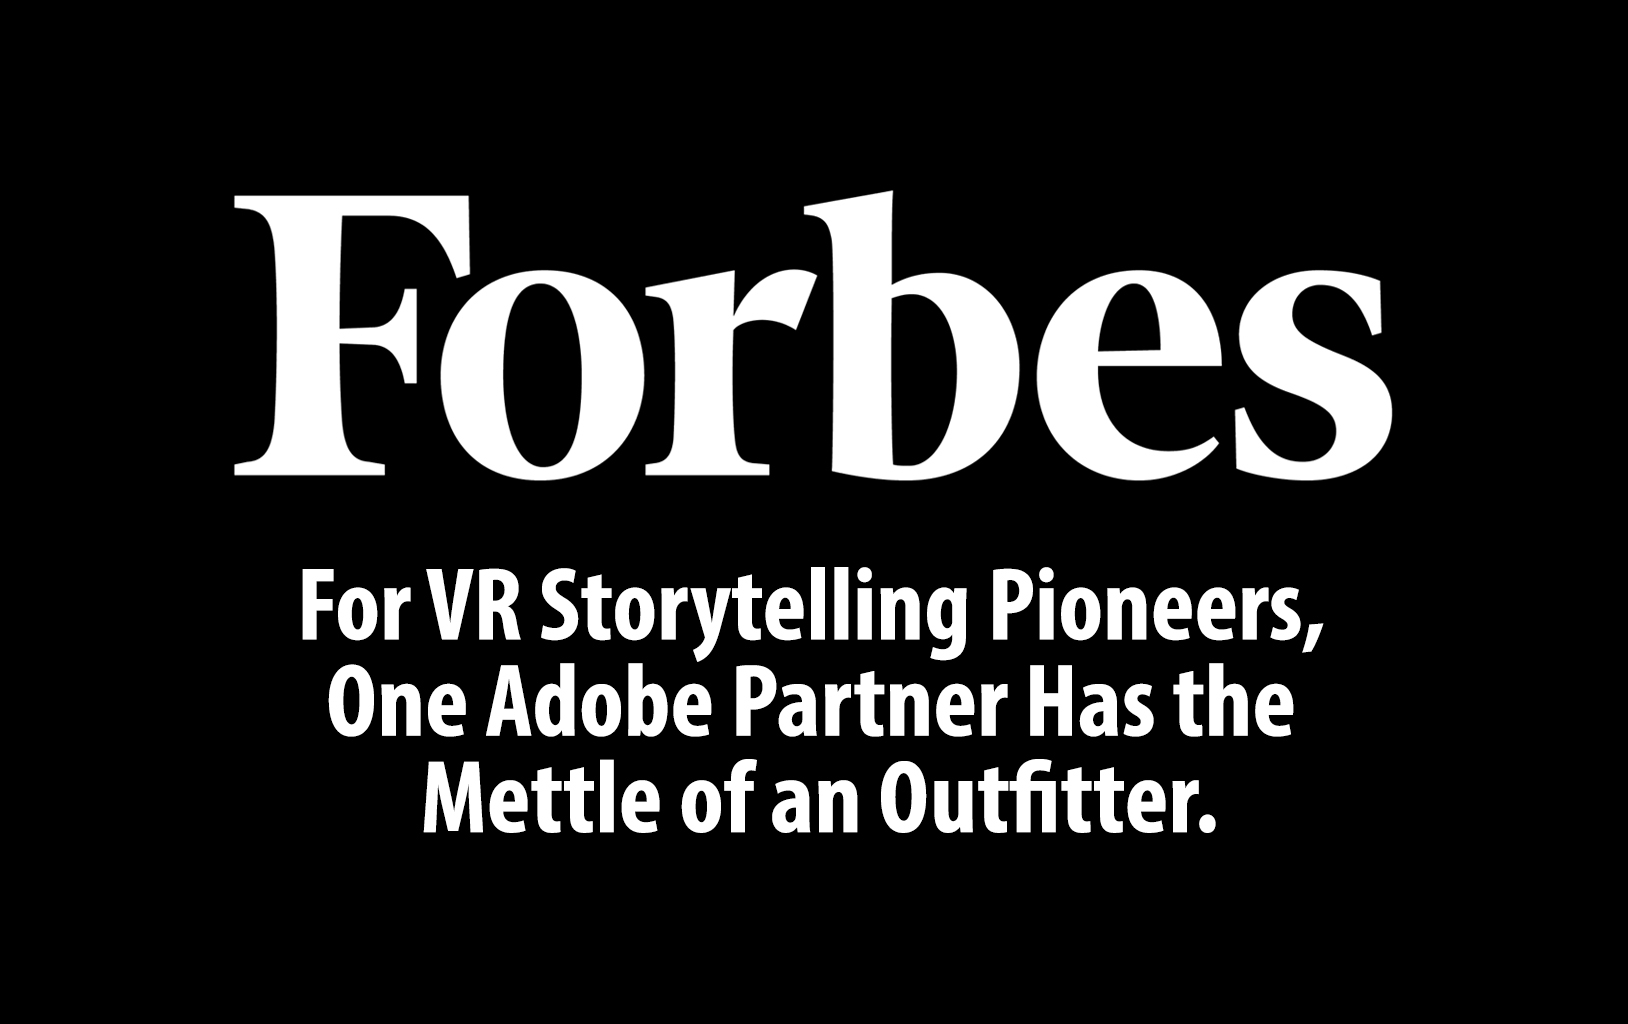 Mettle in Forbes